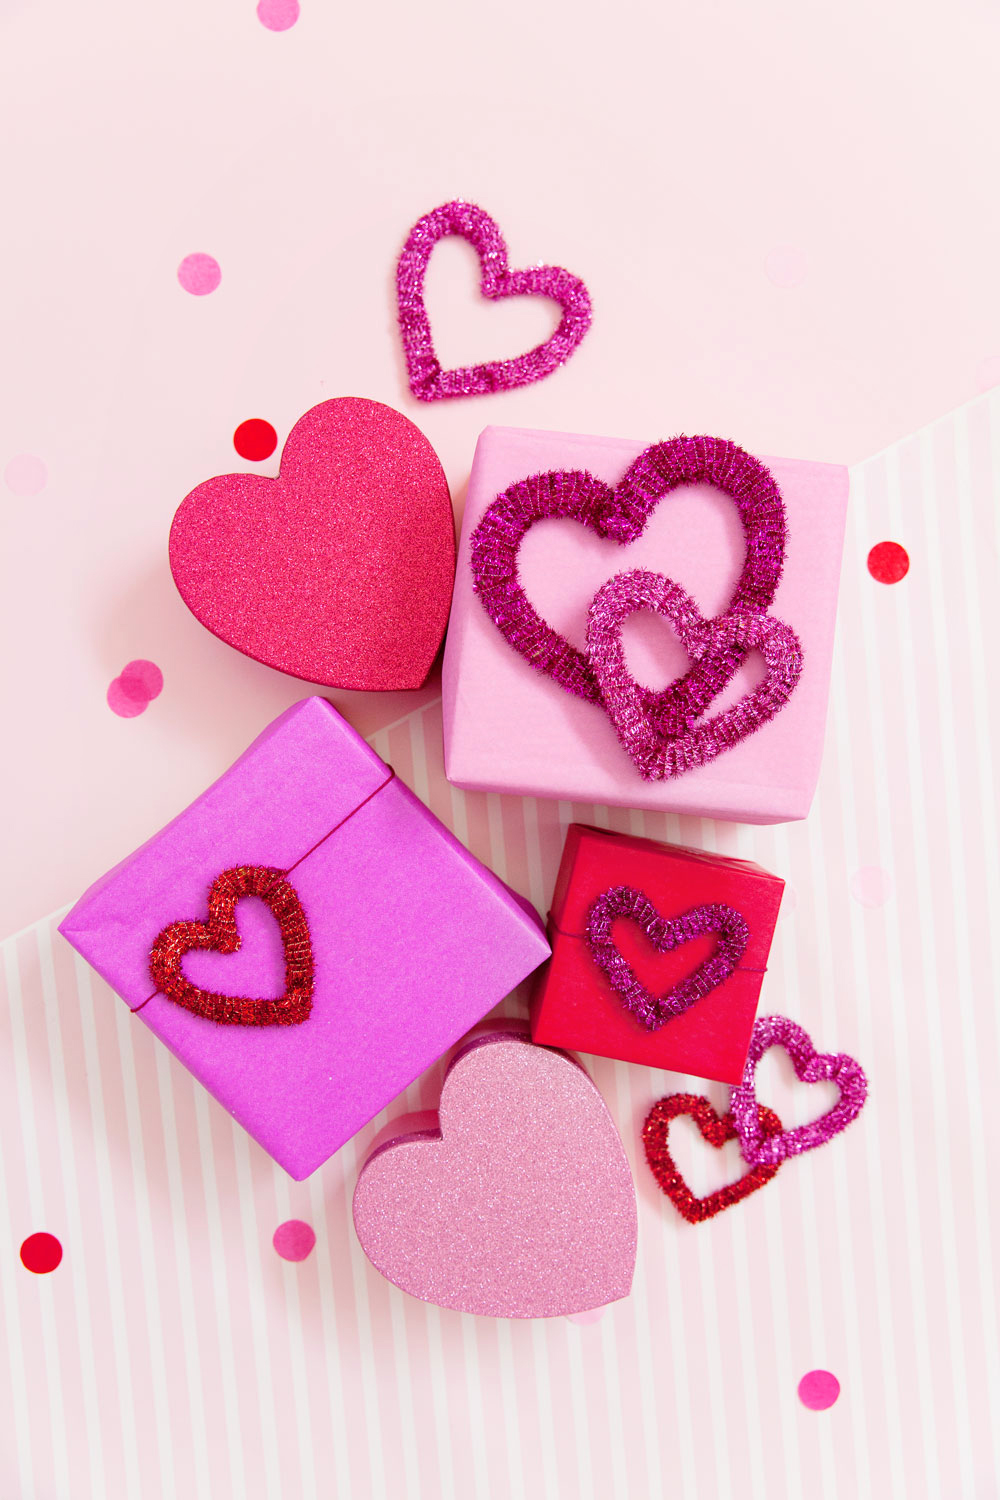 These heart gift toppers are the perfect Valentine's Day craft.  They are so easy to make even kids can join in too.  Make them into a garland or just some cute decor.  -DIY -Hearts -craft blogger -valentine's day craft 